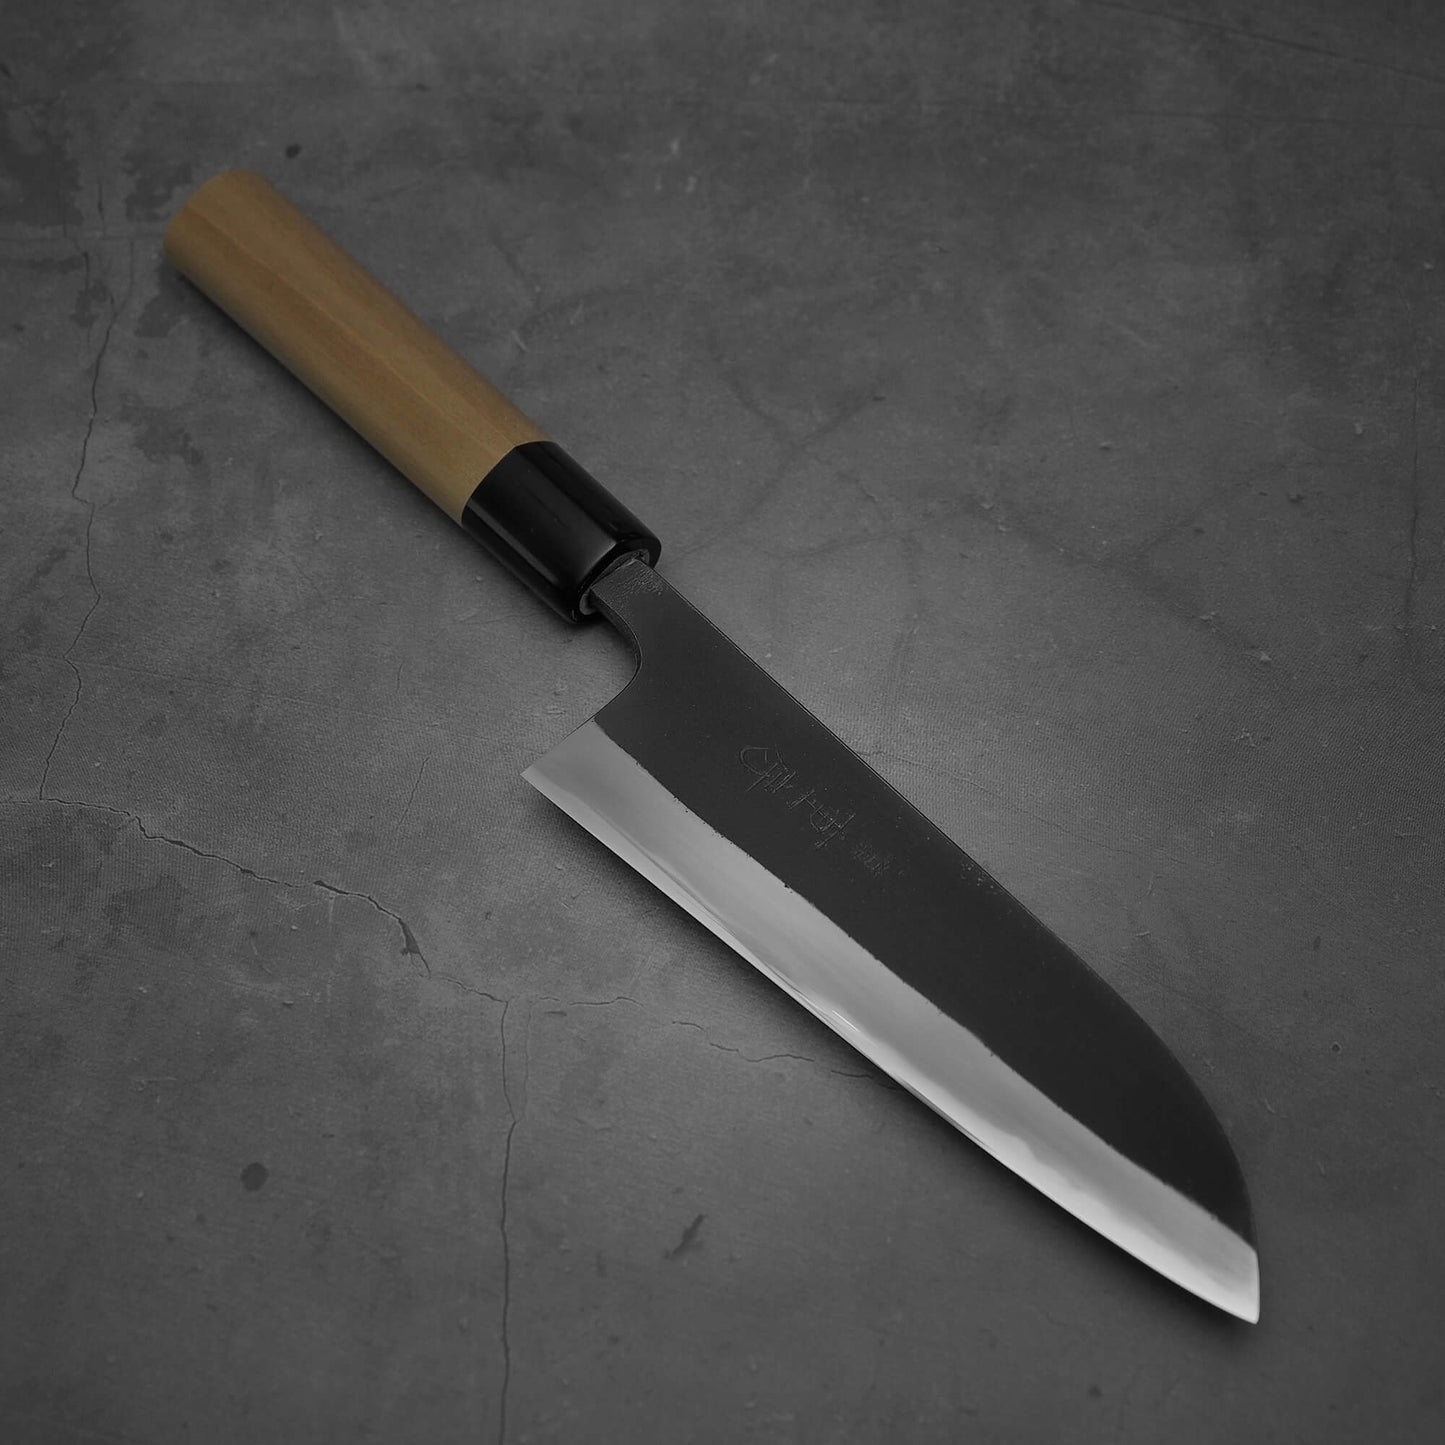 Top view of Shigefusa kurouchi 165mm santoku where the tip faces lower right